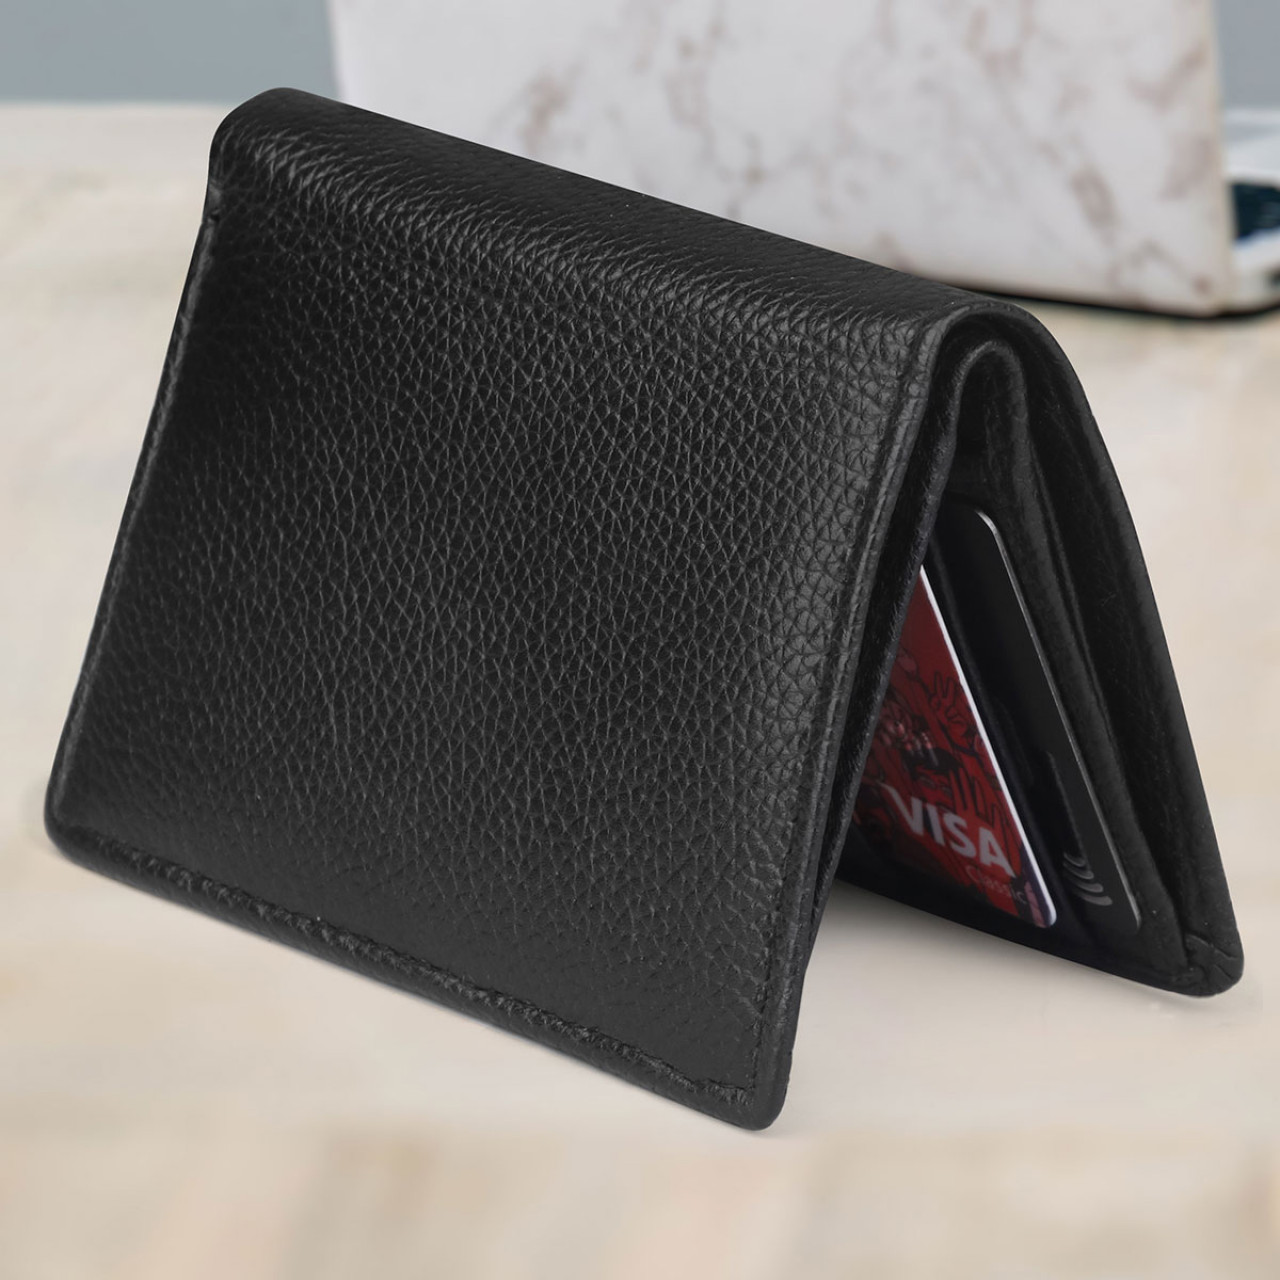 Premium Leather Wallet With RFID Theft Protection